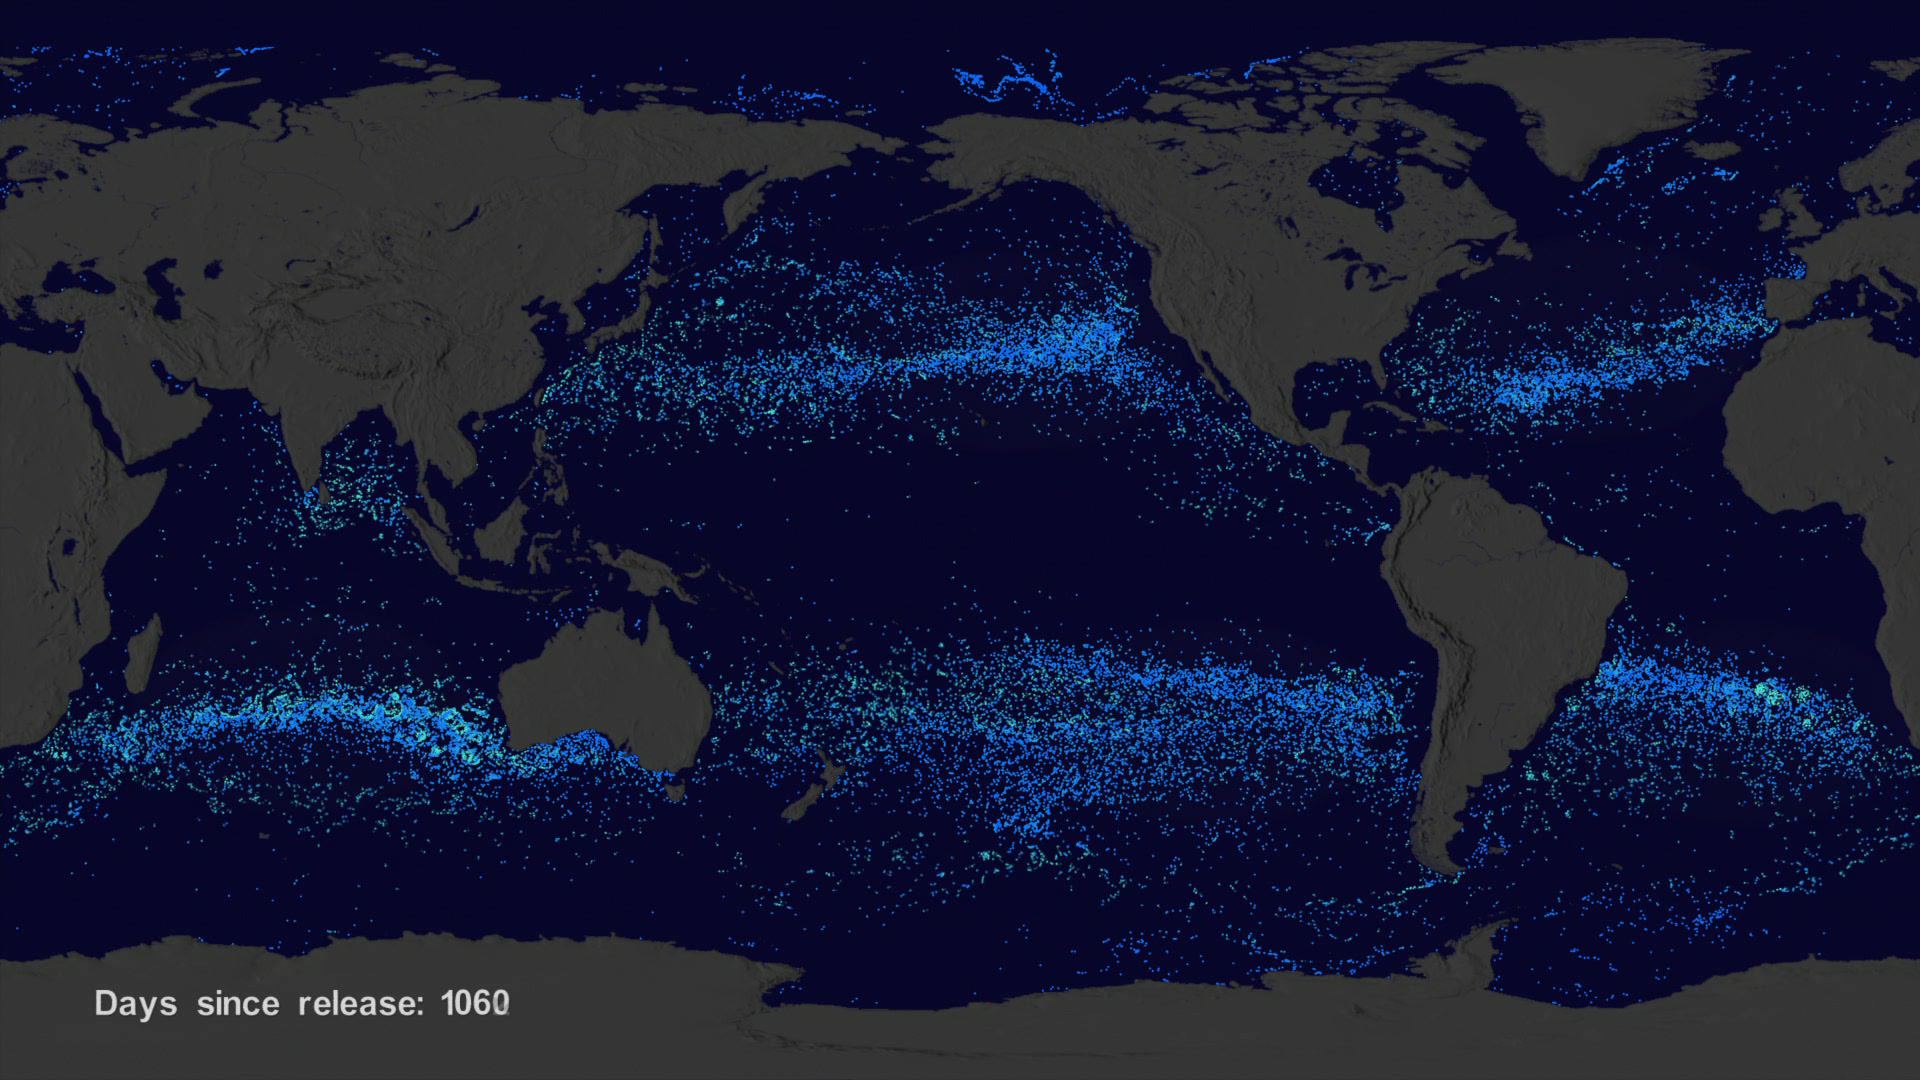 garbage patches in Earth's oceans